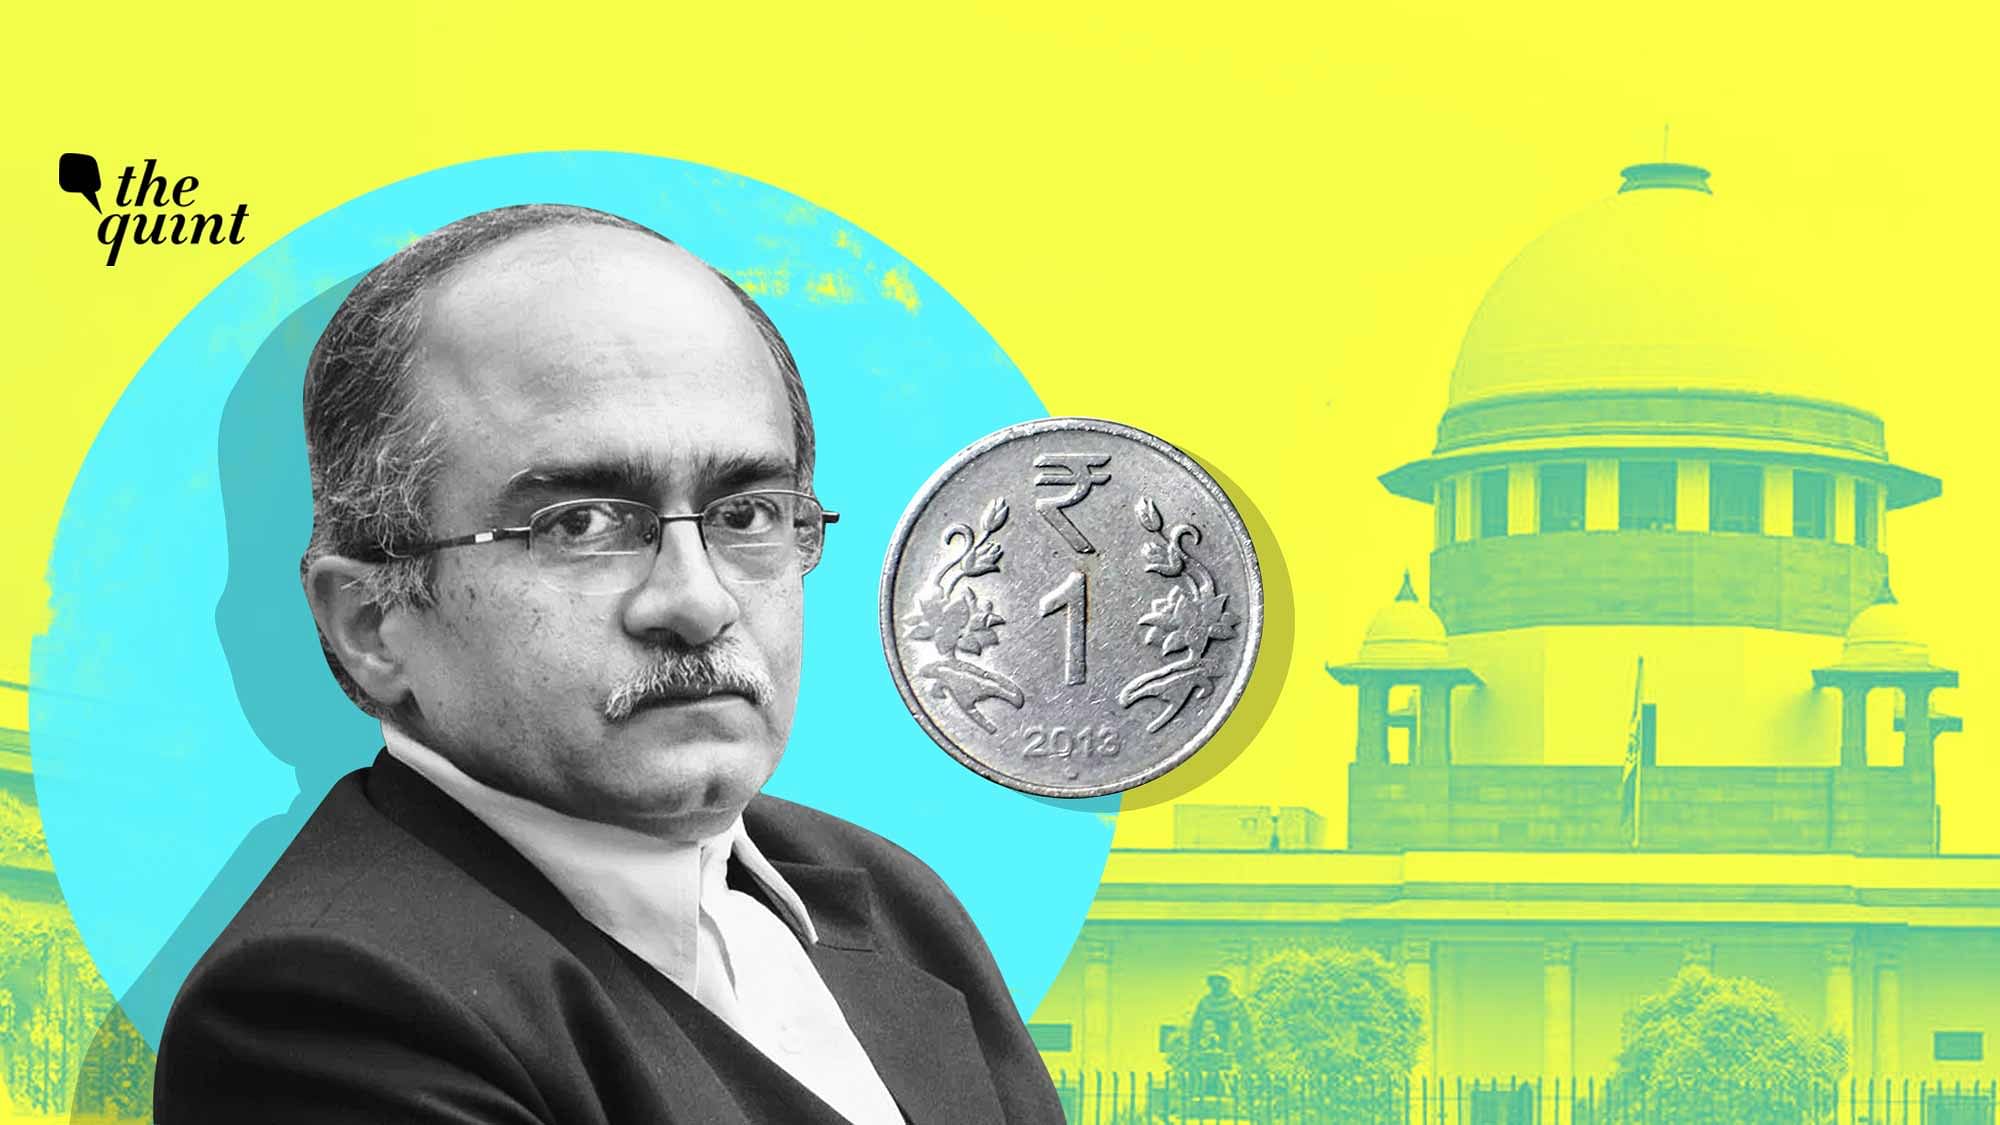 Activist-lawyer Prashant Bhushan, on Thursday, 1 October, filed a petition seeking review of the Supreme Court's verdict which slapped a fine of Re. 1 on him for contempt of court.